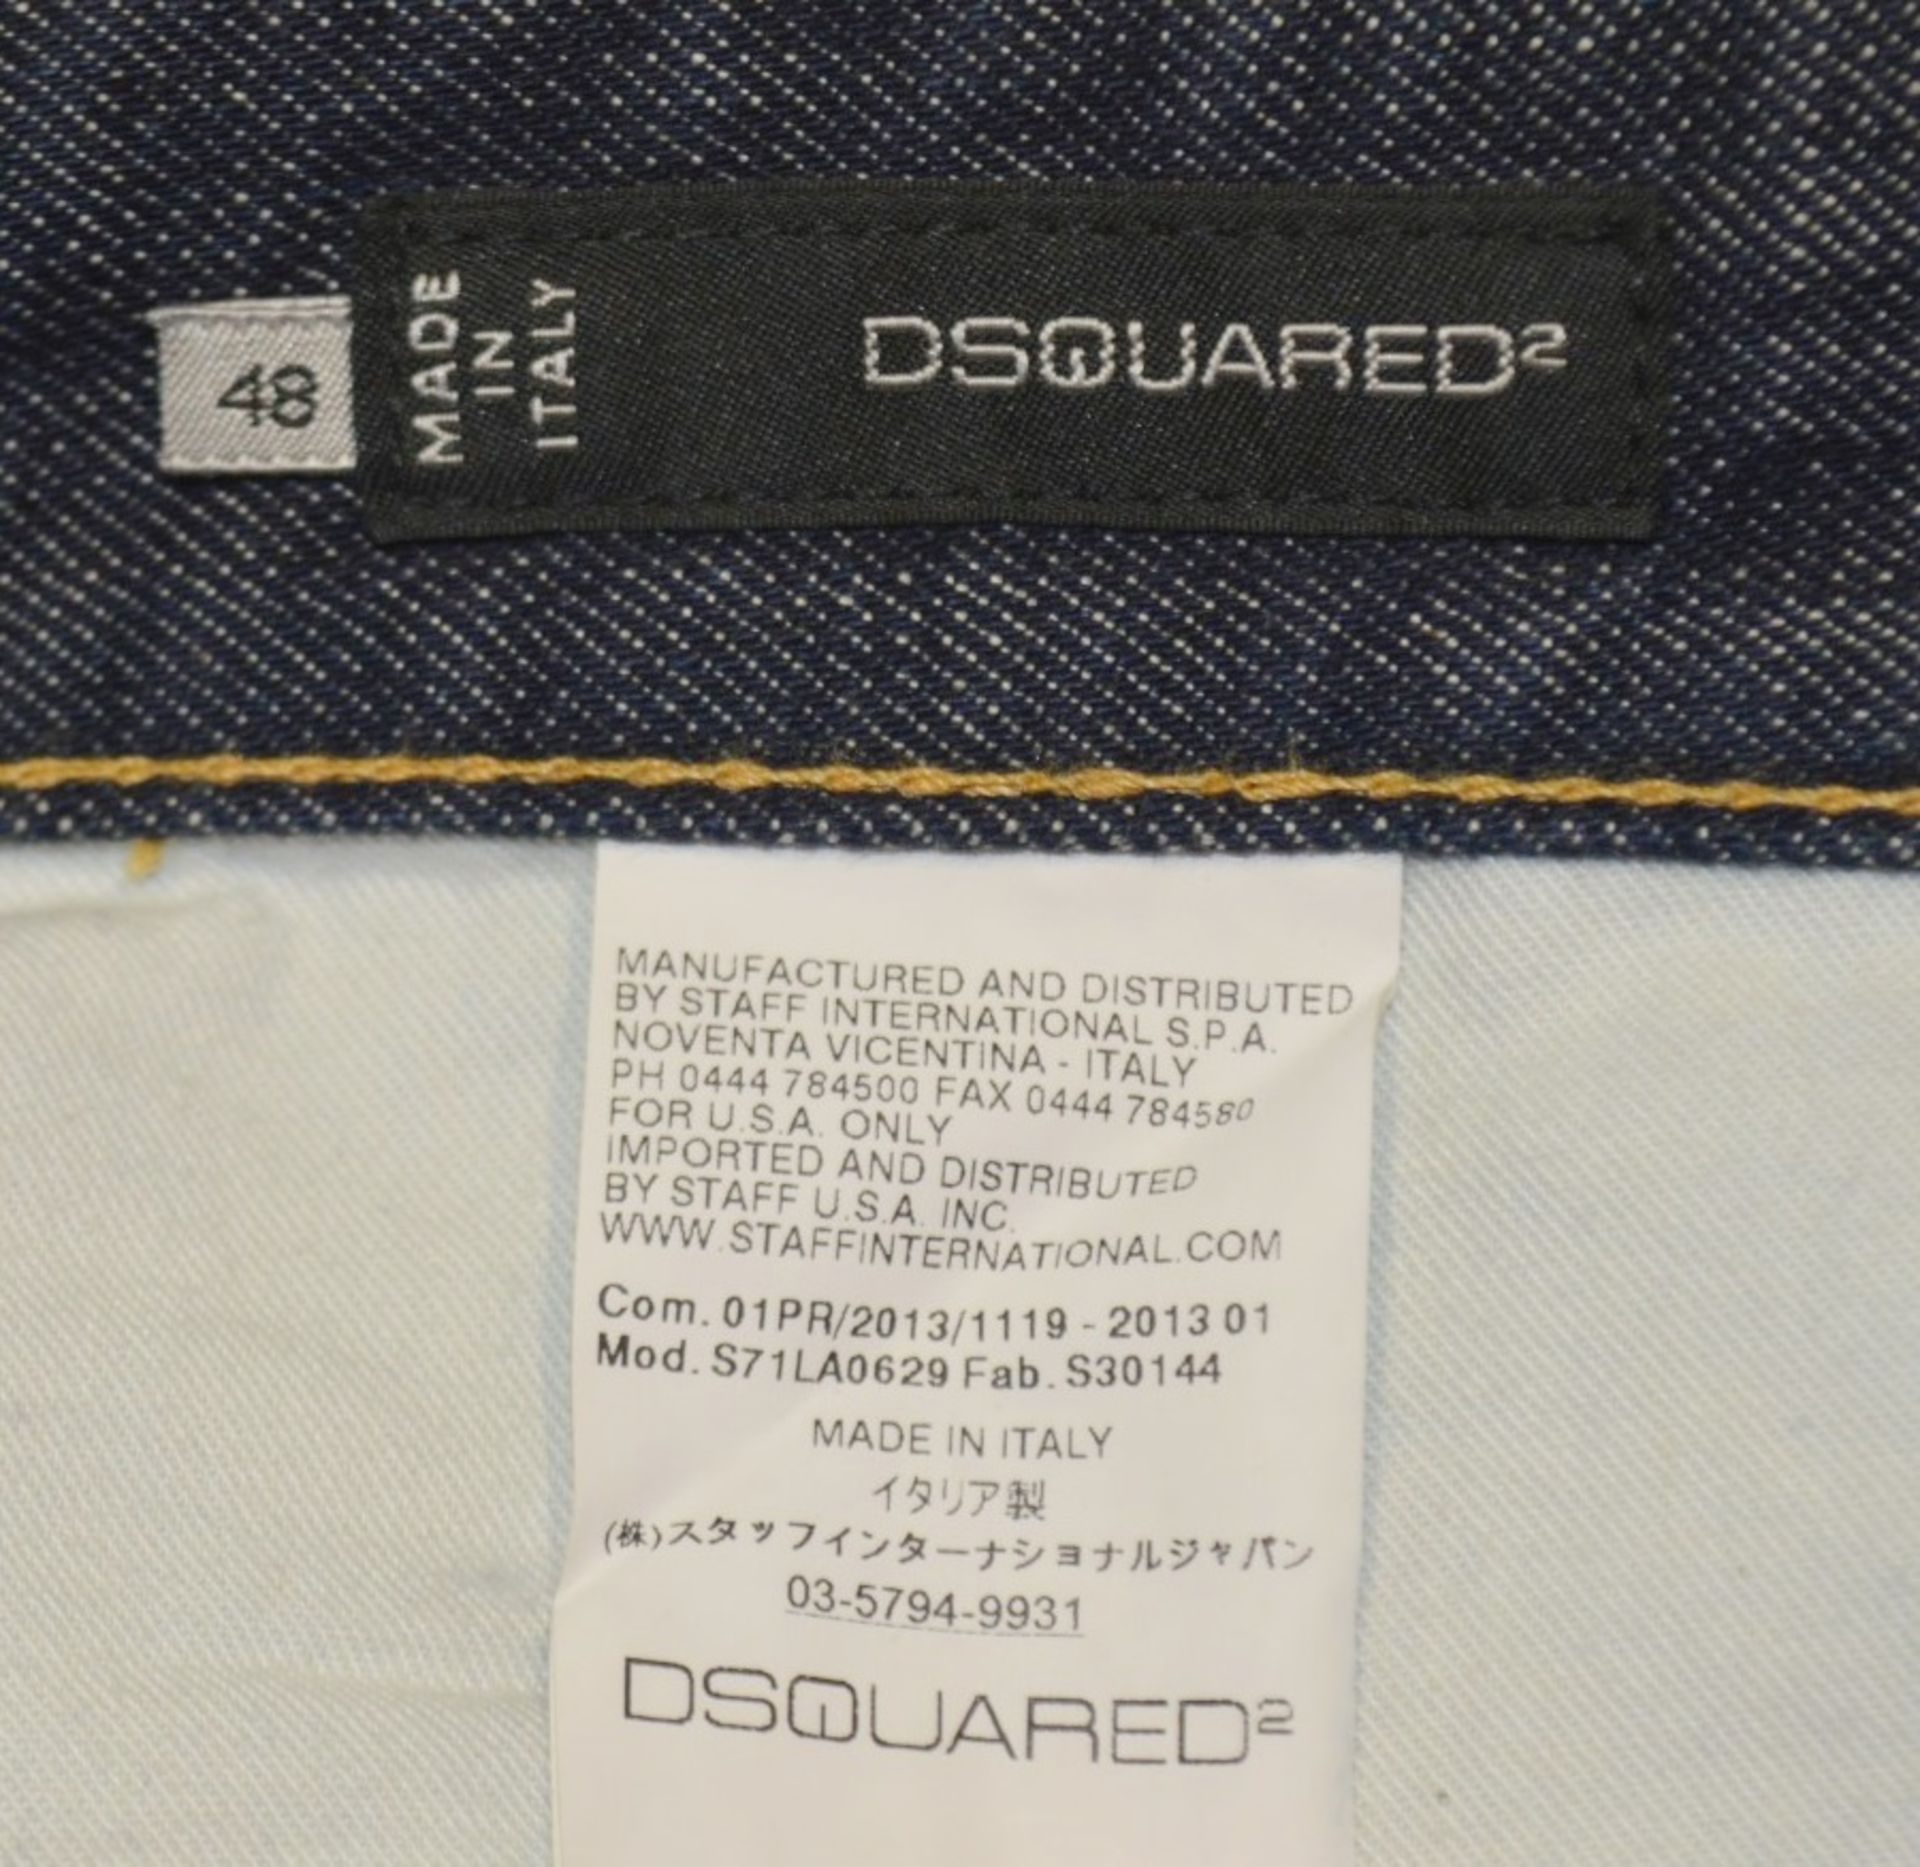 1 x Pair Of Men's Genuine Dsquared2 Jeans In Dark Blue - Size: 48 - Preowned In Very Good - Image 7 of 9